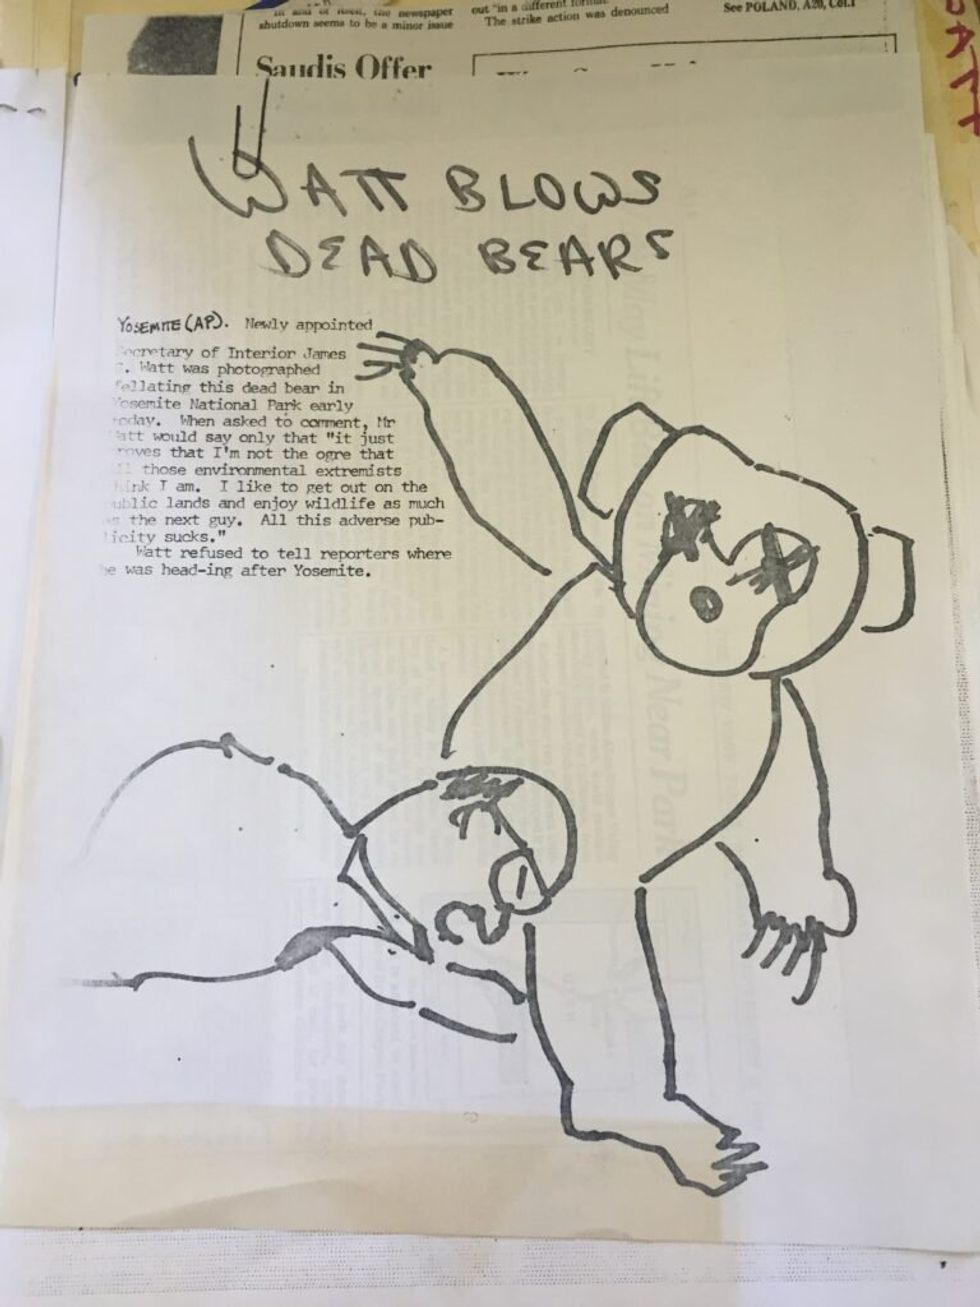 Crude cartoon drawing of James Watt fellating a dead bear, with the title 'Watt Blows Dead Bears' and a fake news story saying Watt had been photographed in the act of blowing the bear in Yellowstone National Park